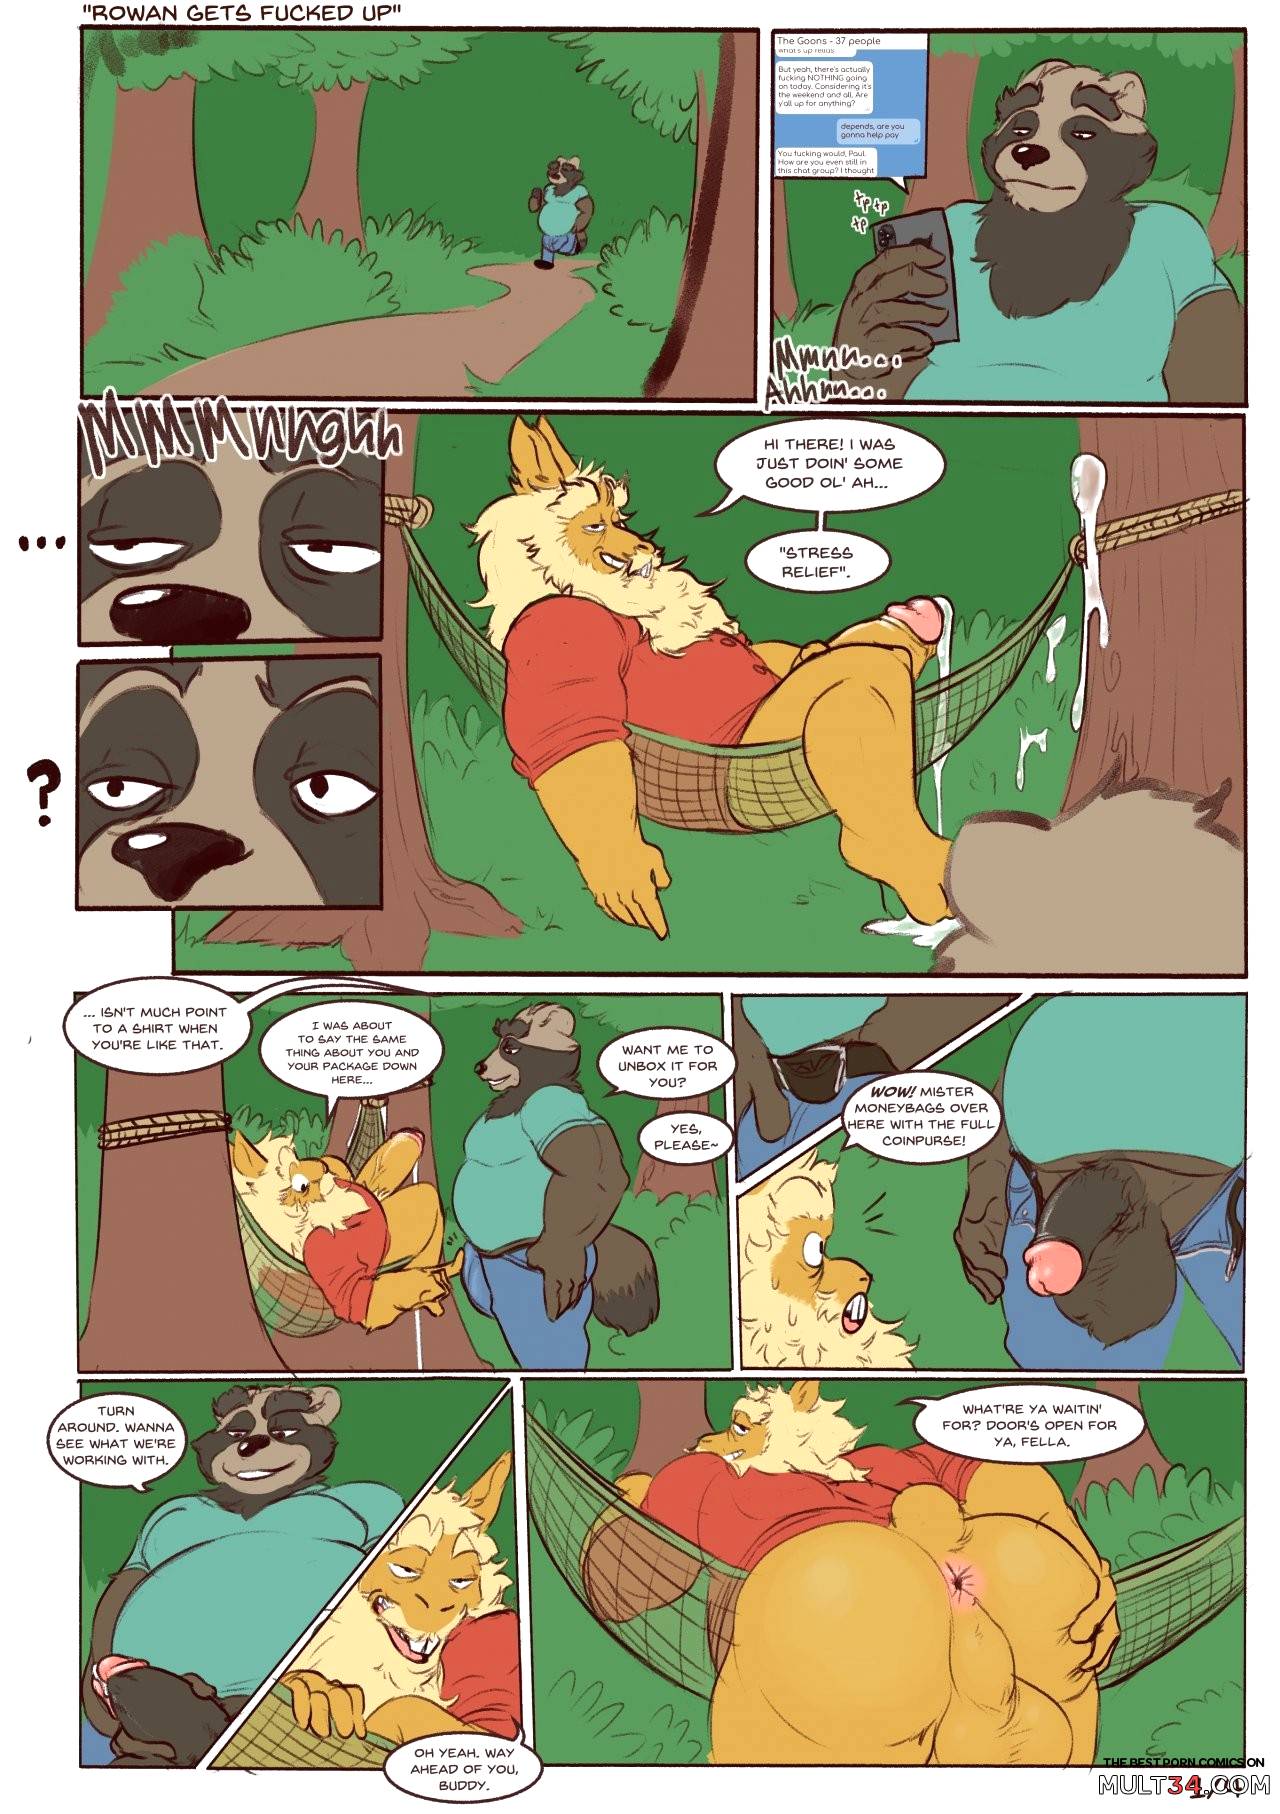 Rowan gets fucked up page 1